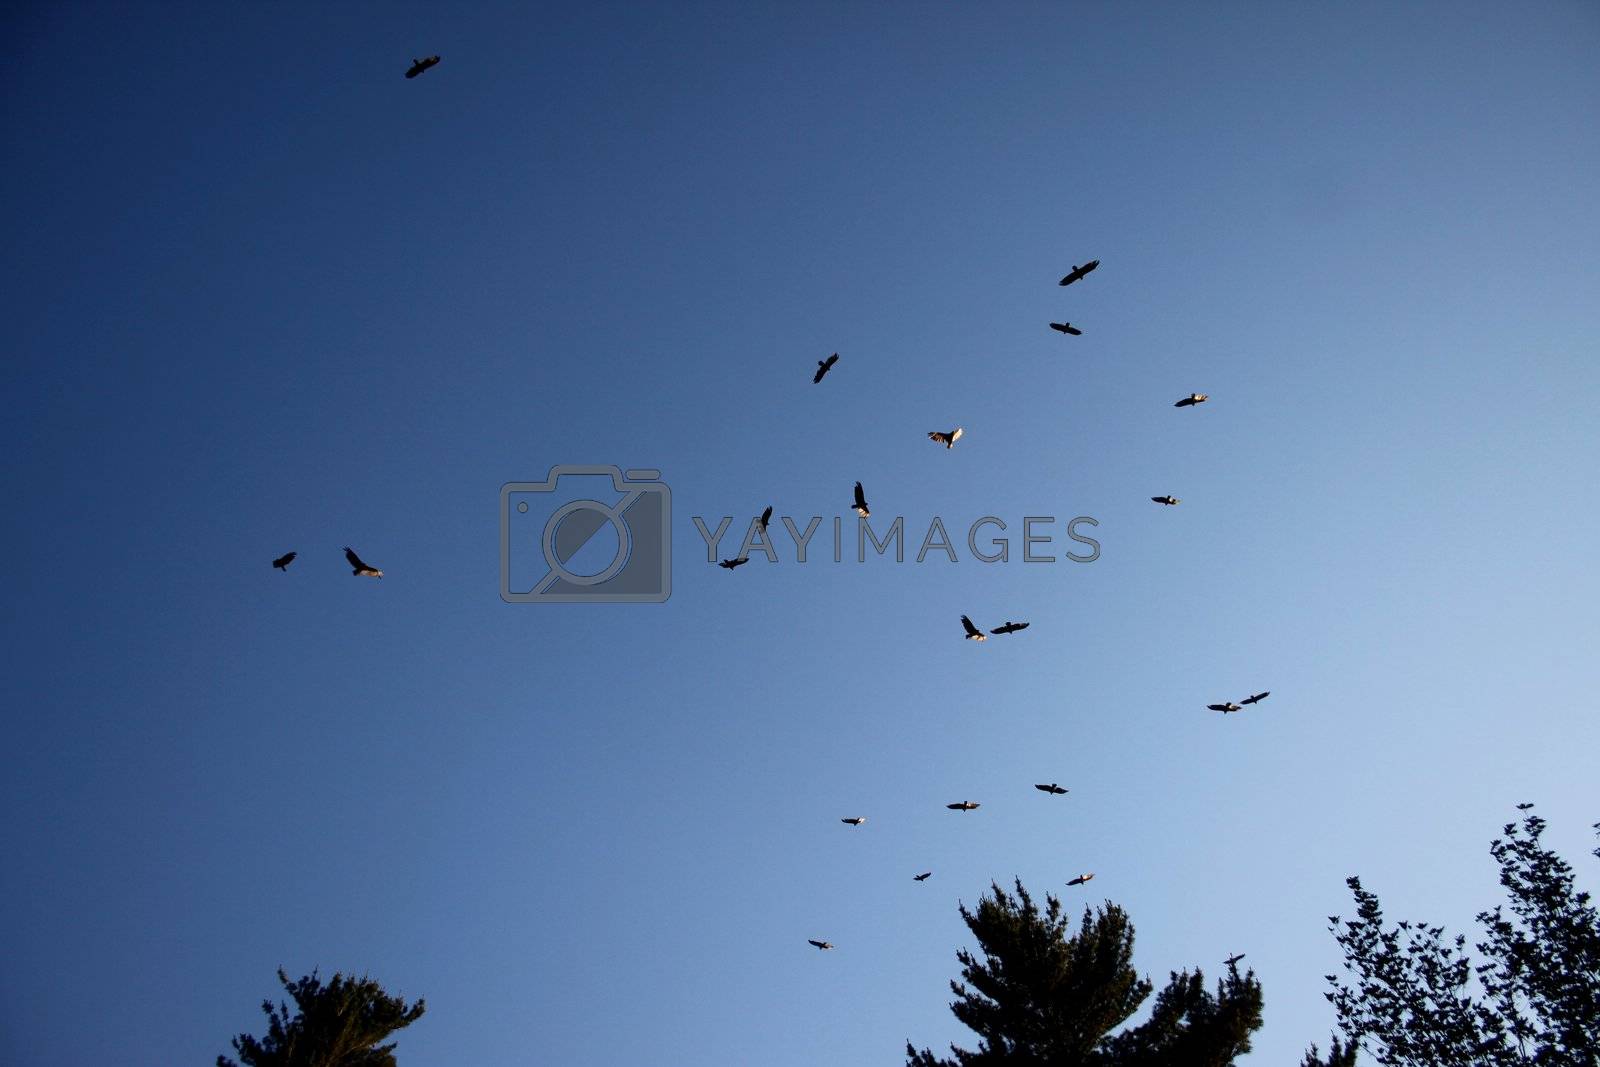 Royalty free image of Falcons in the sky by dbriyul